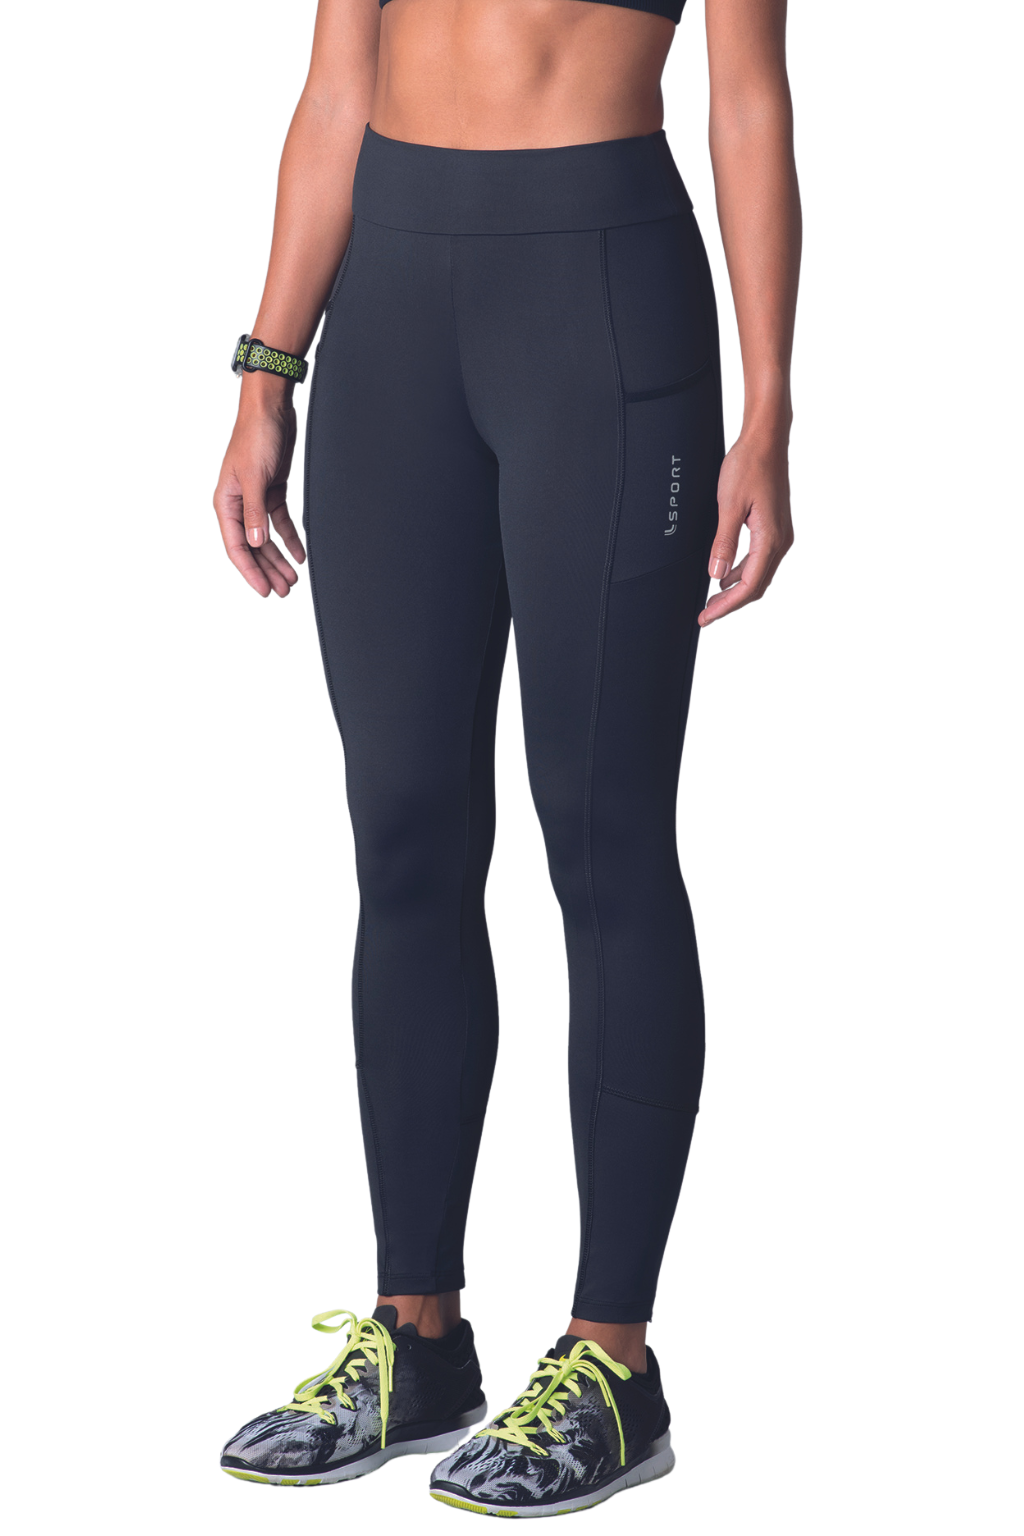 BASIC Fusion style Sport Legging with double and versatile waistband -  METRO BRAZIL